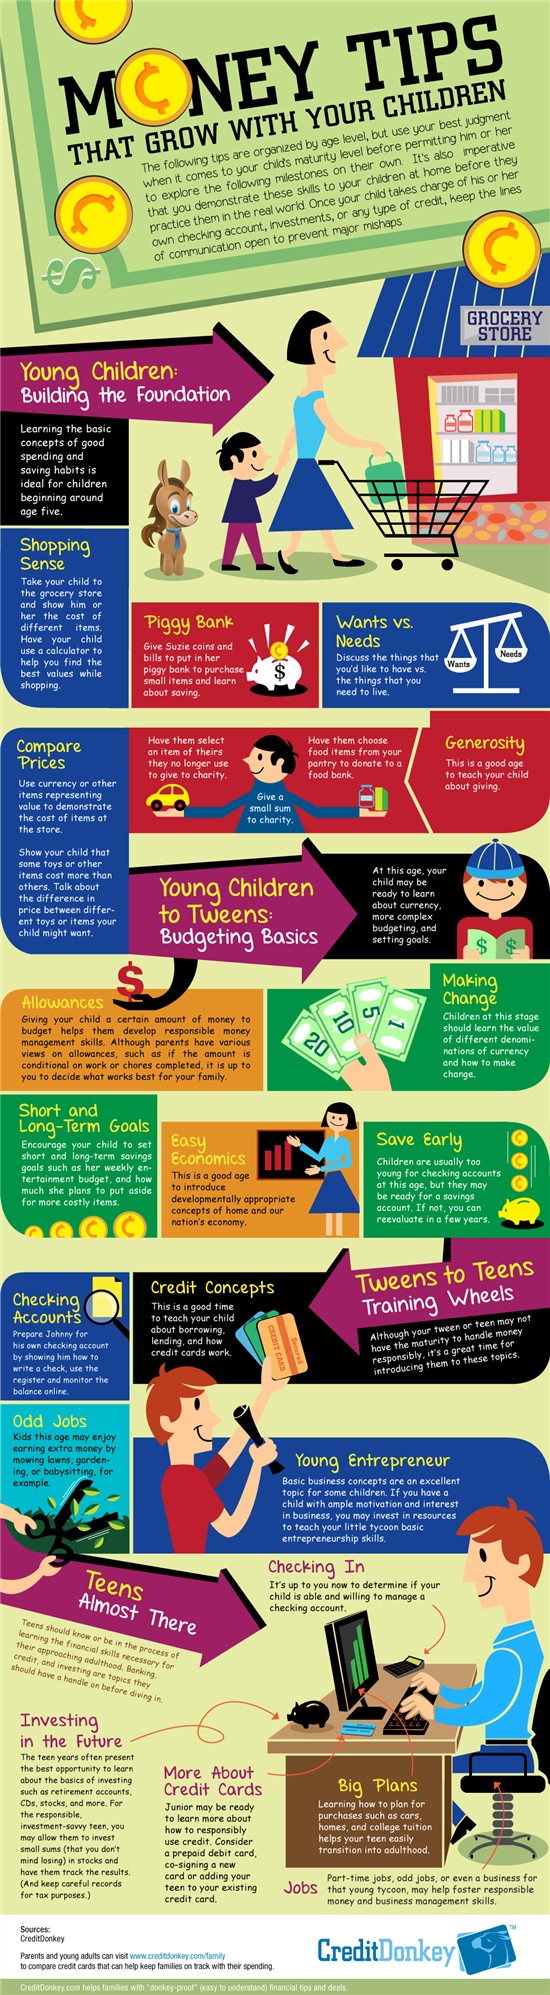 Infographic: Money Tips that Grow With Your Children